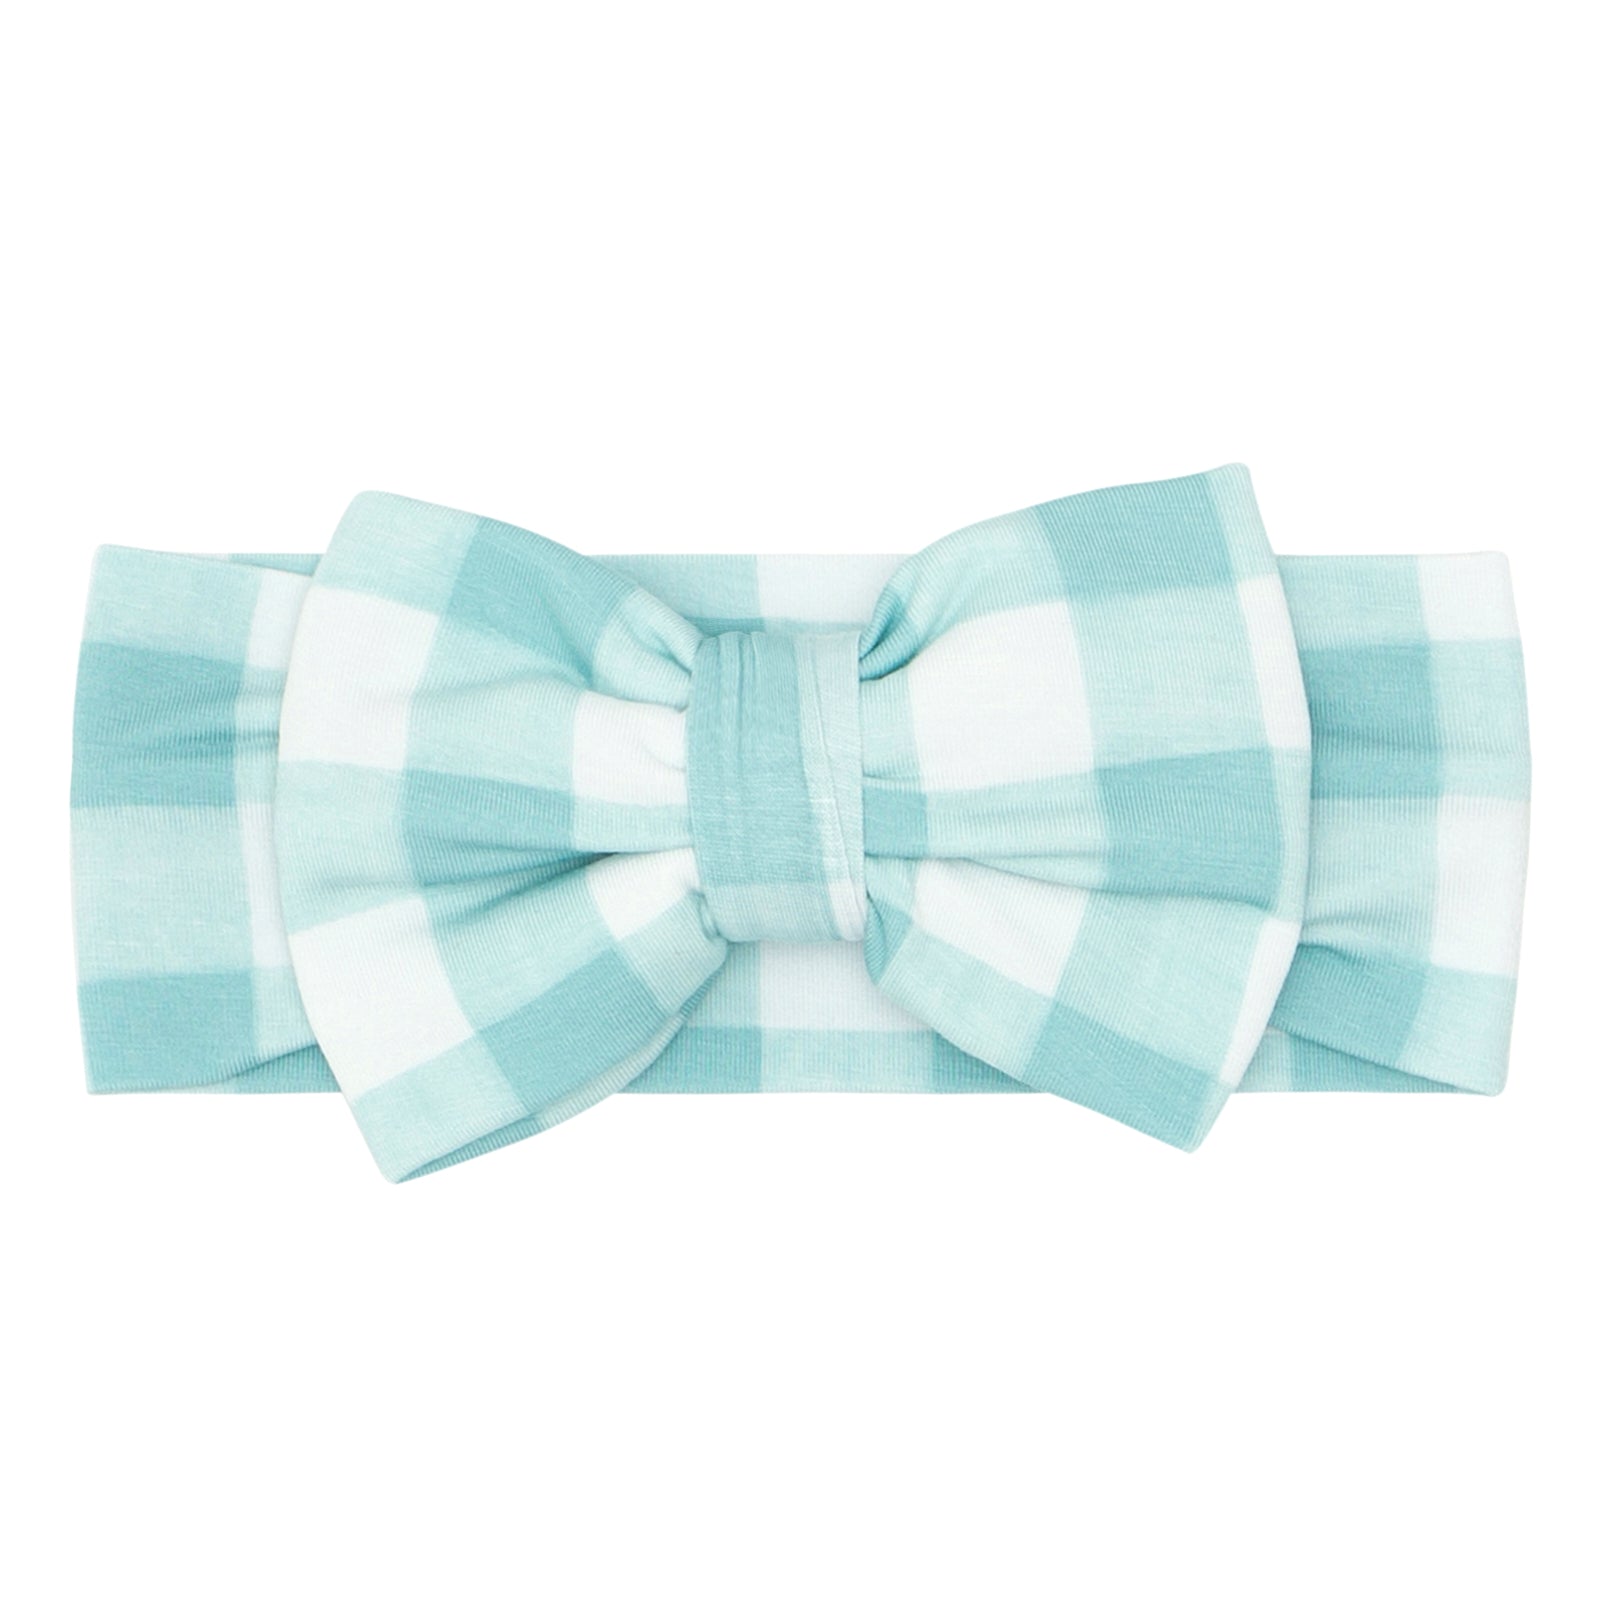 Flat lay image of an Aqua Gingham luxe bow headband in size newborn to age four